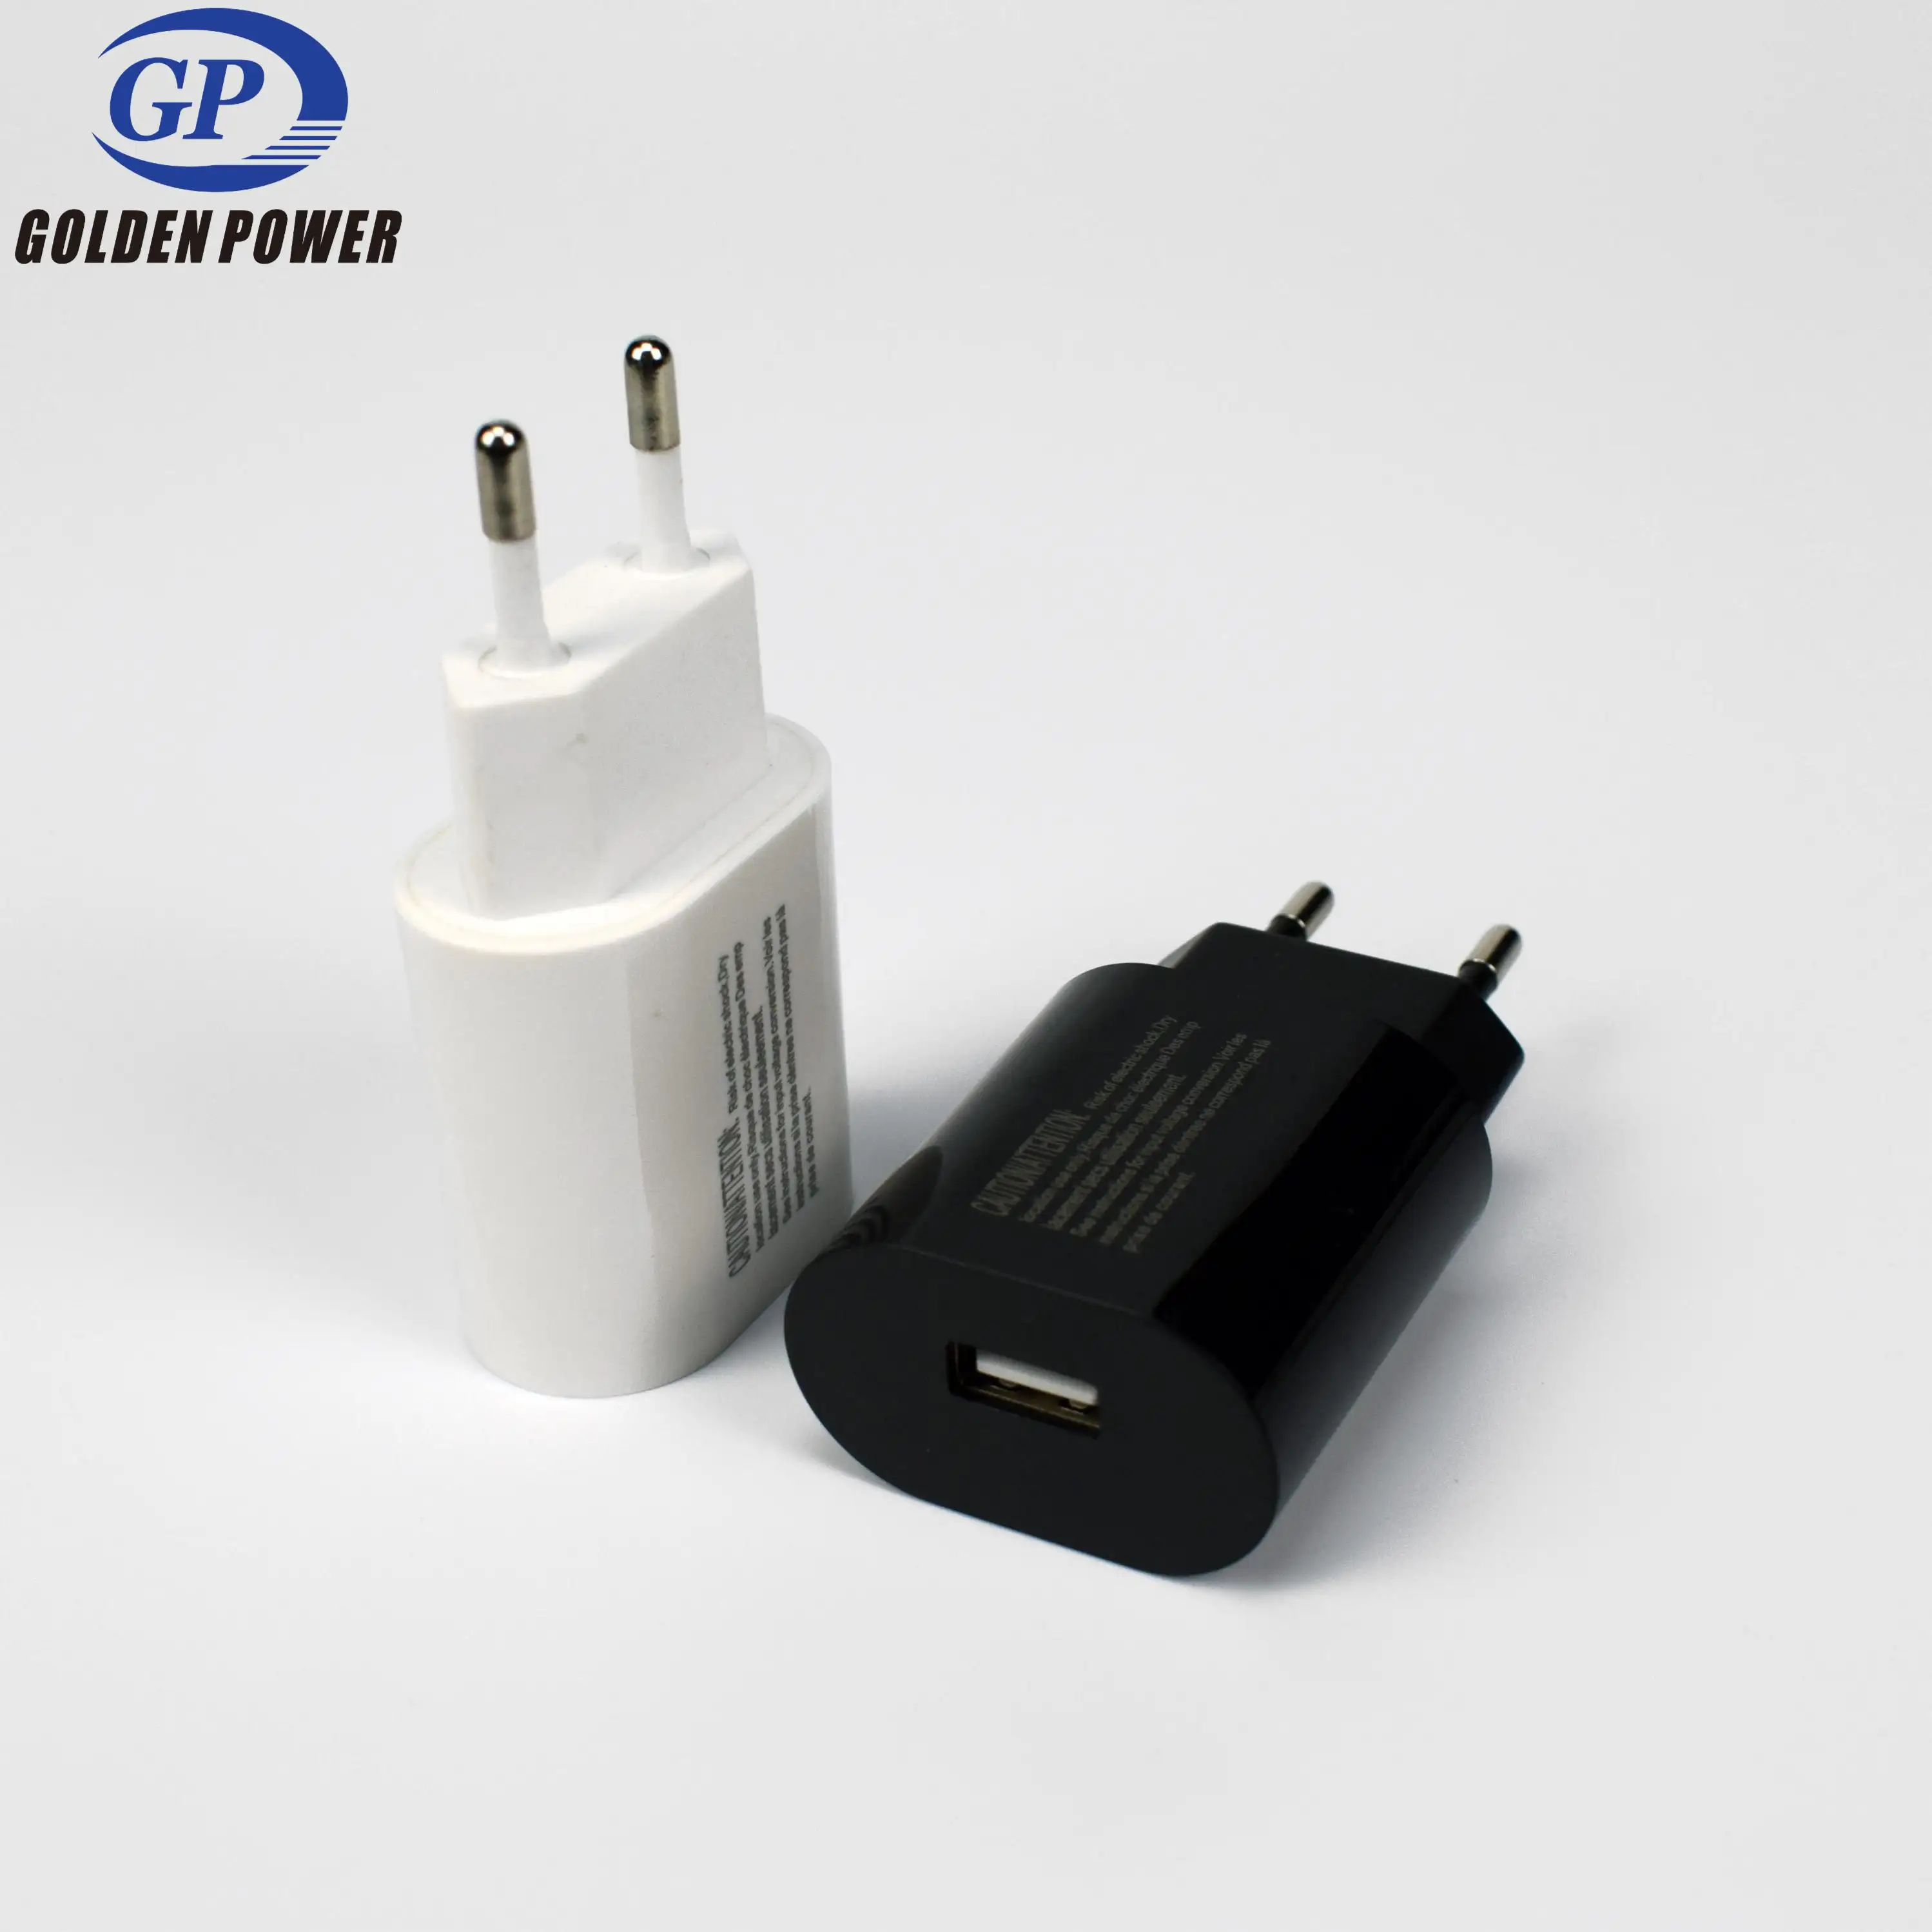 Custom EU/US/UK portable USB 2A android wall charger adapter for mobile